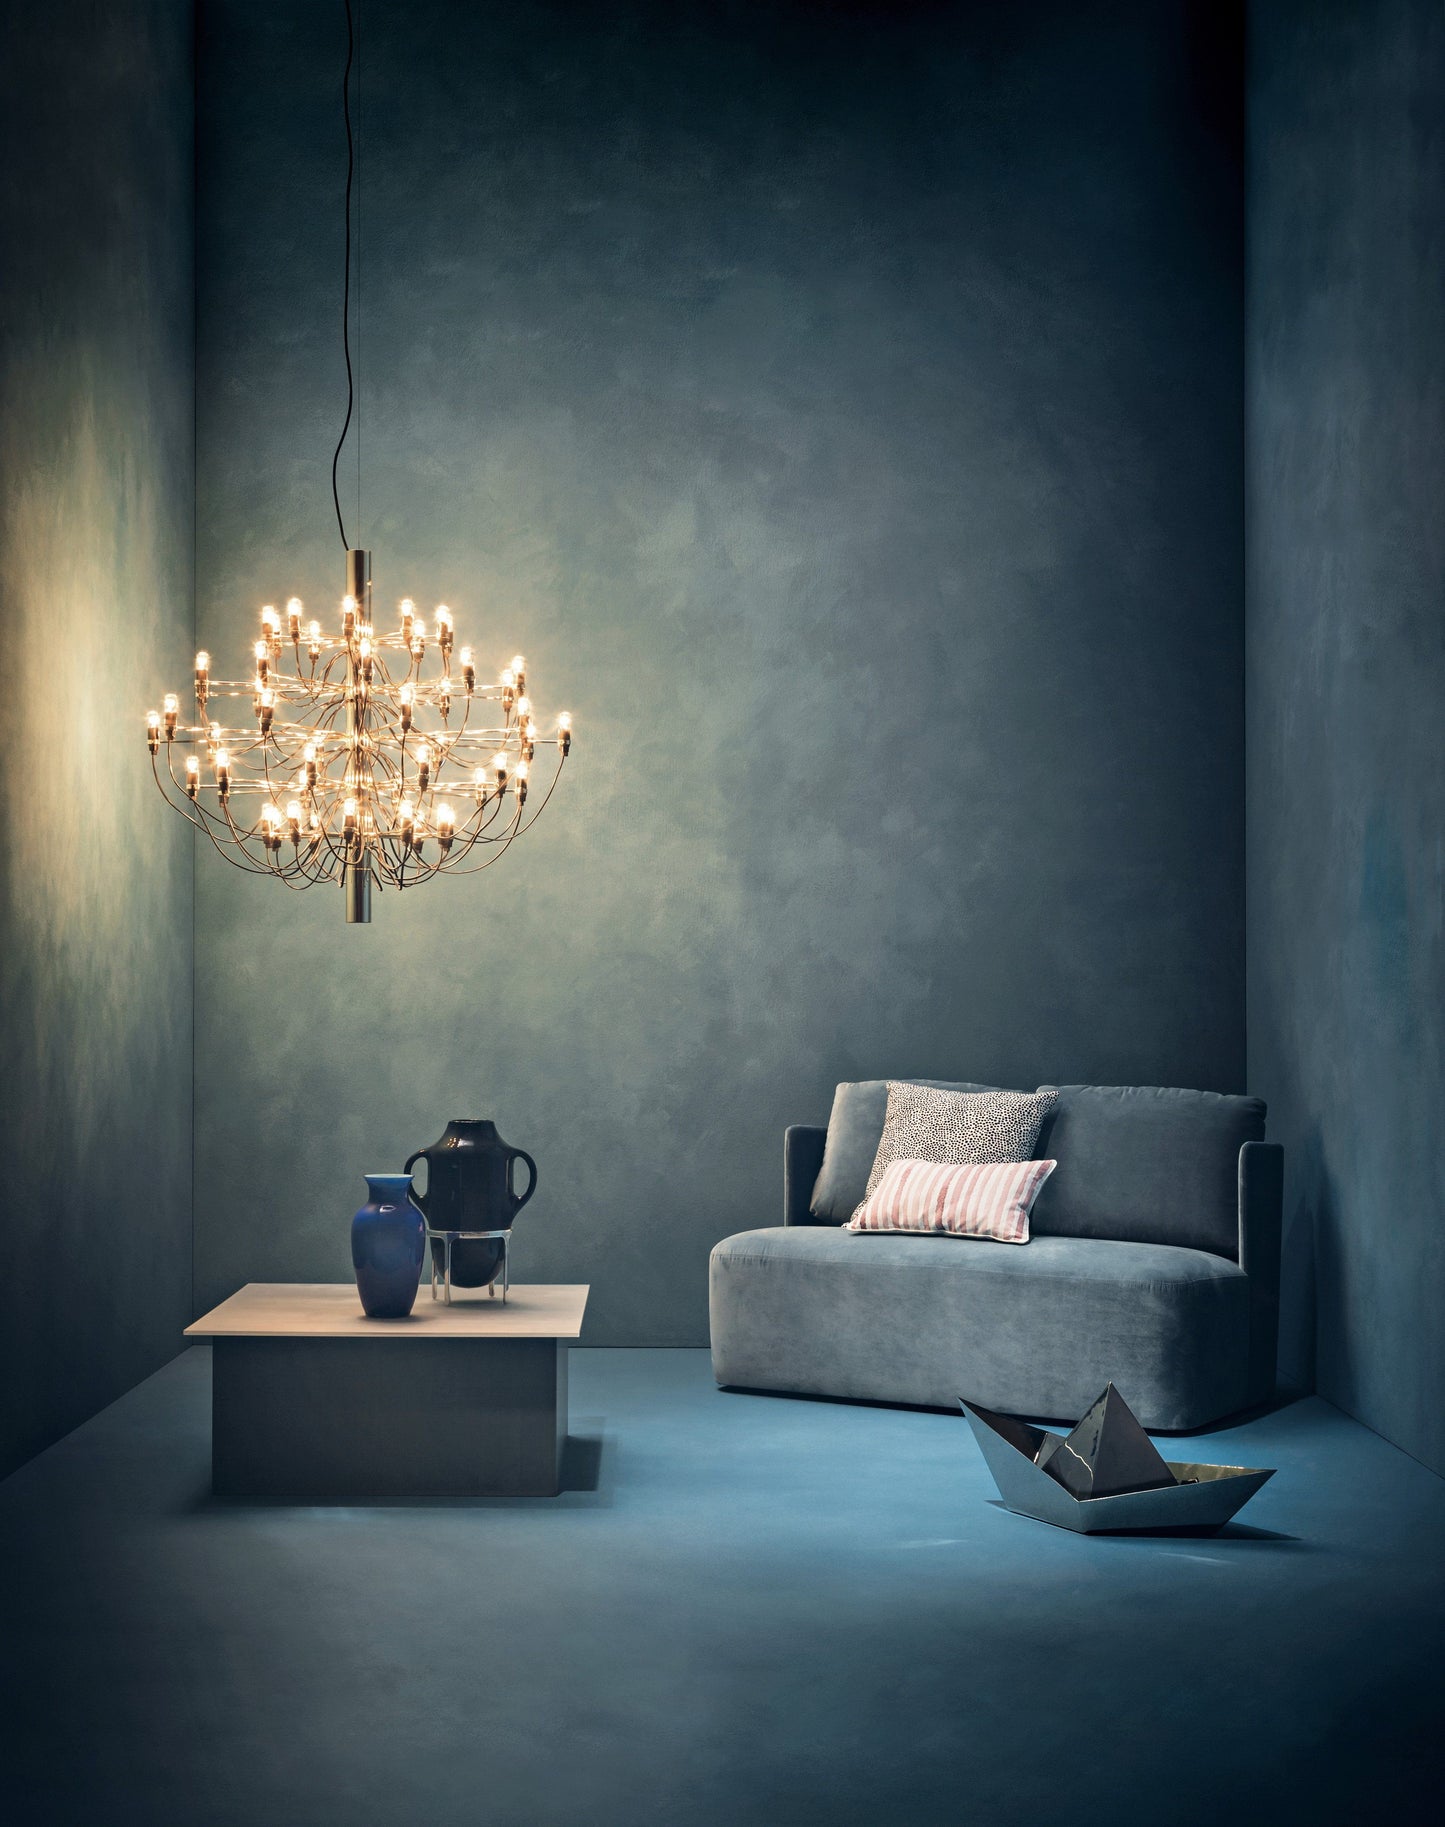 FLOS 2097/30 Suspension In Polished Brass With Frosted LED Bulbs Included - 9894